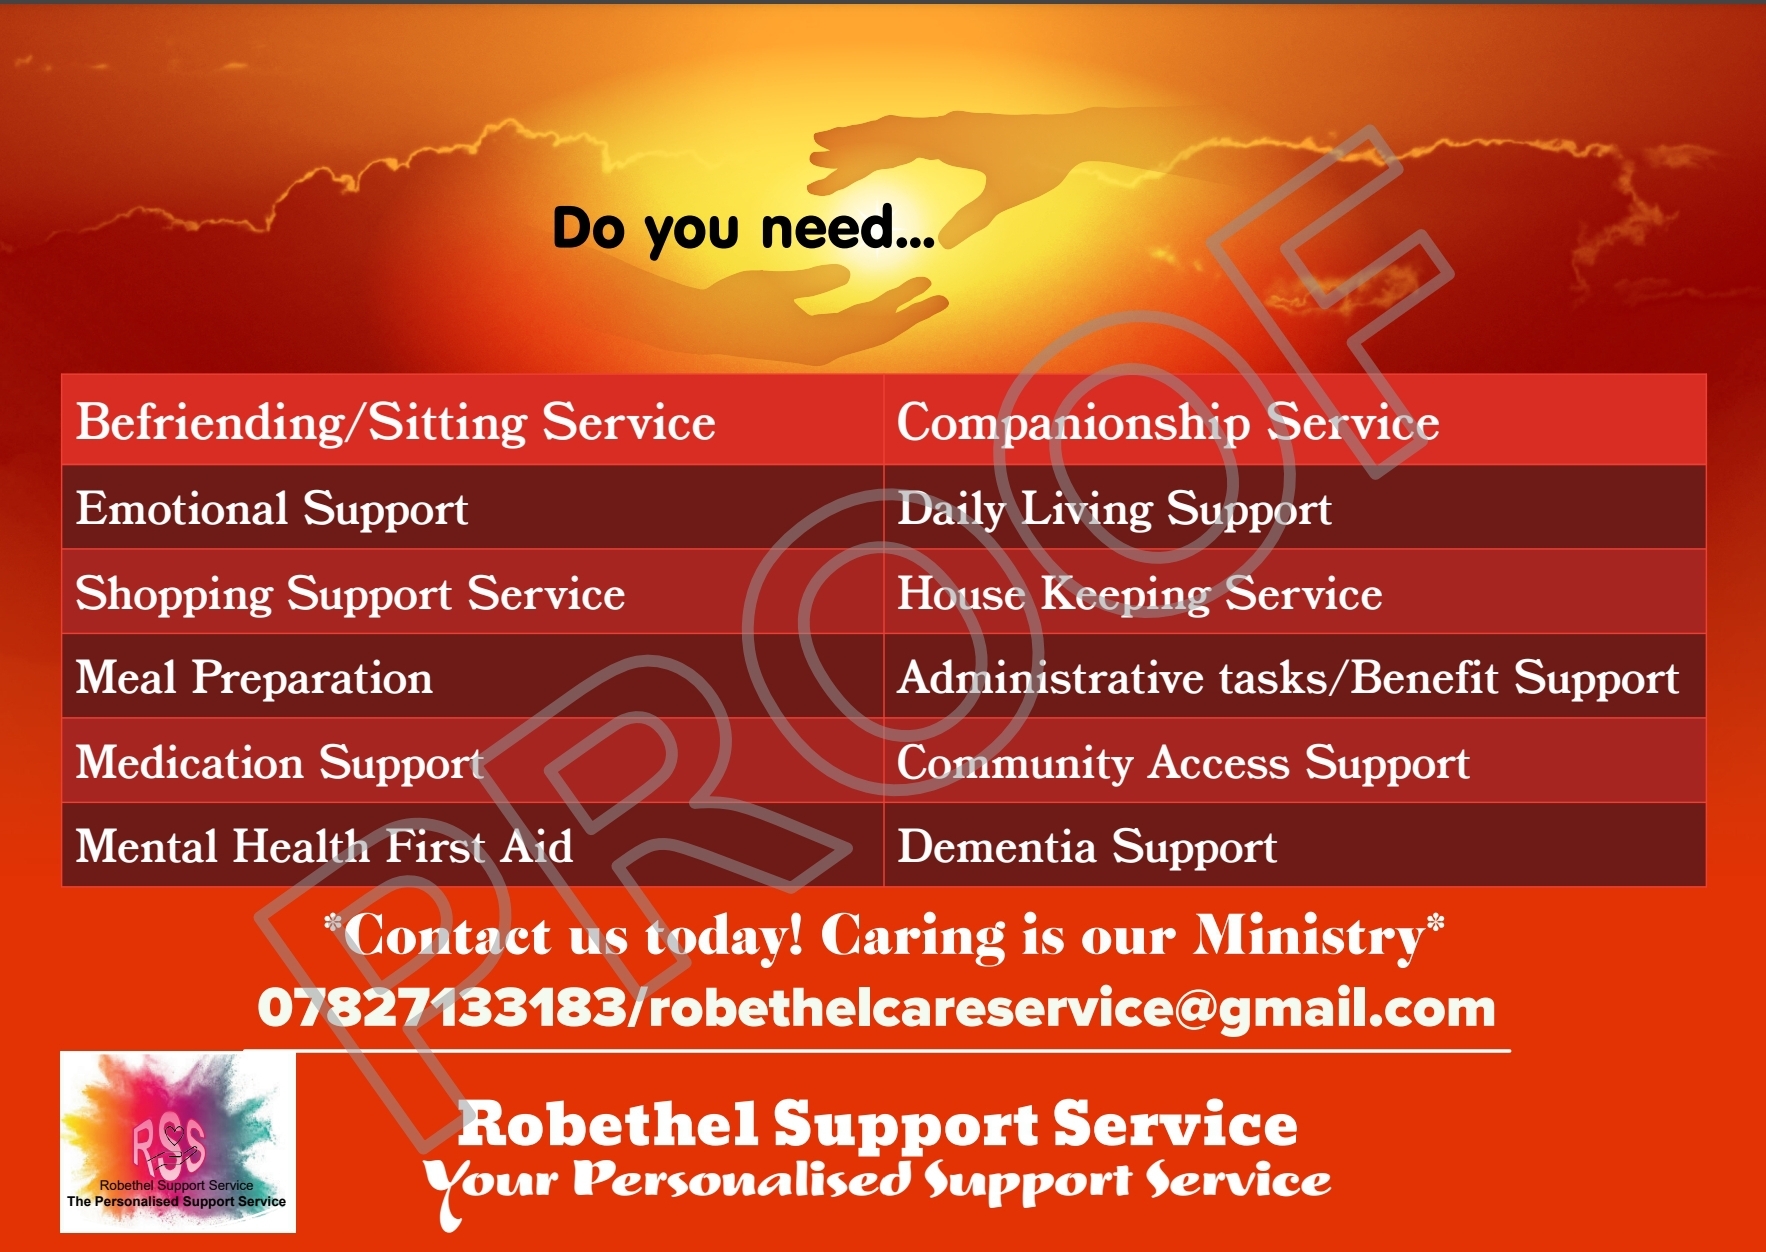 To outline our services.